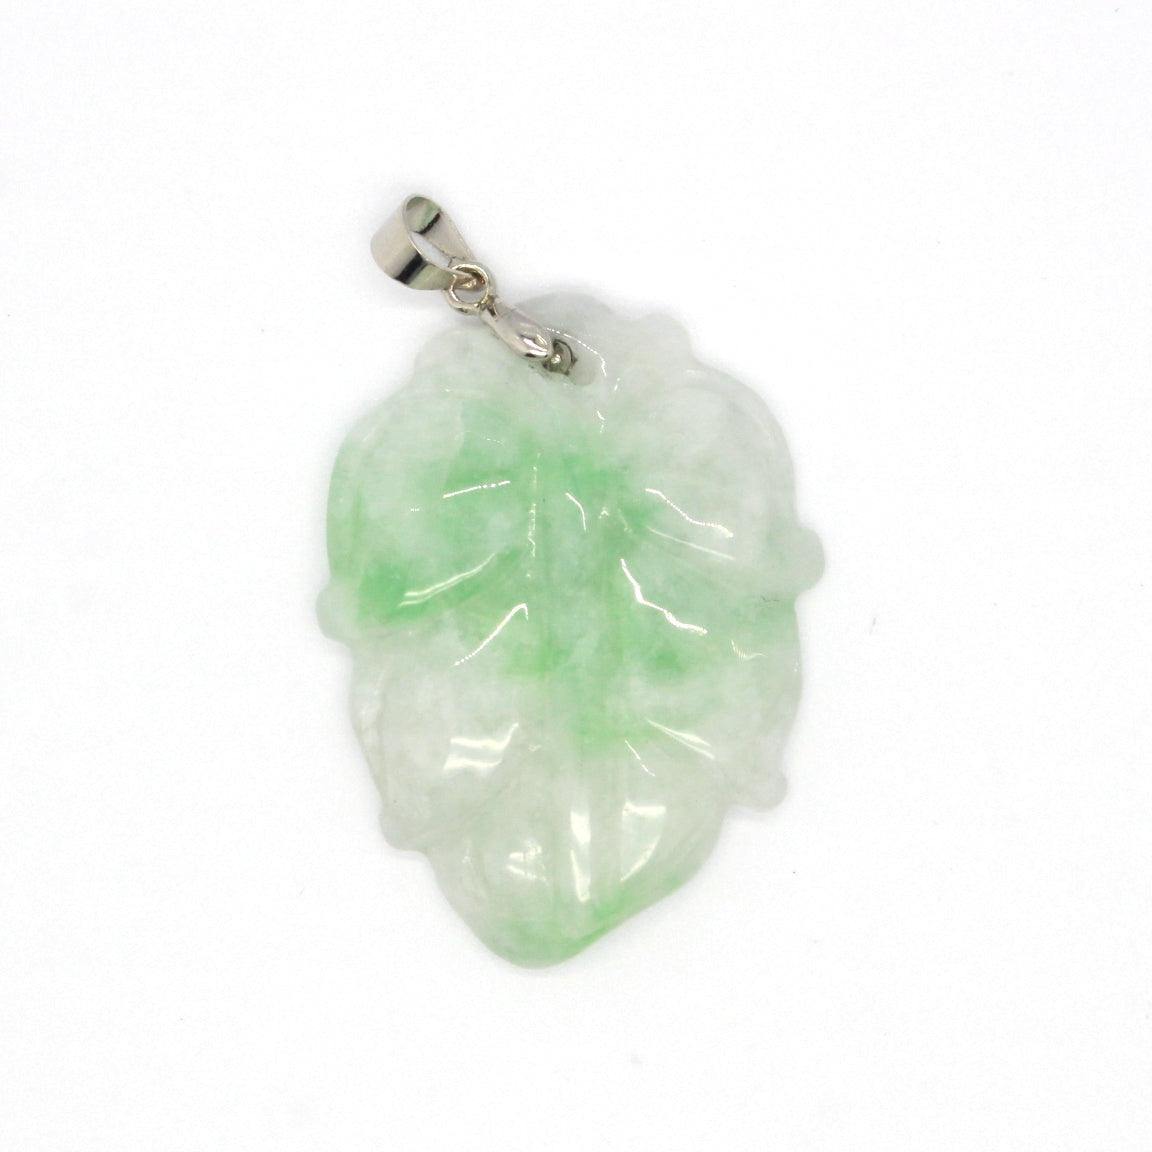 Type A Jadeite Jade Leaf Pendant Series (Fullfill USA only) B08QJDMZF6 - Jade-collector.com